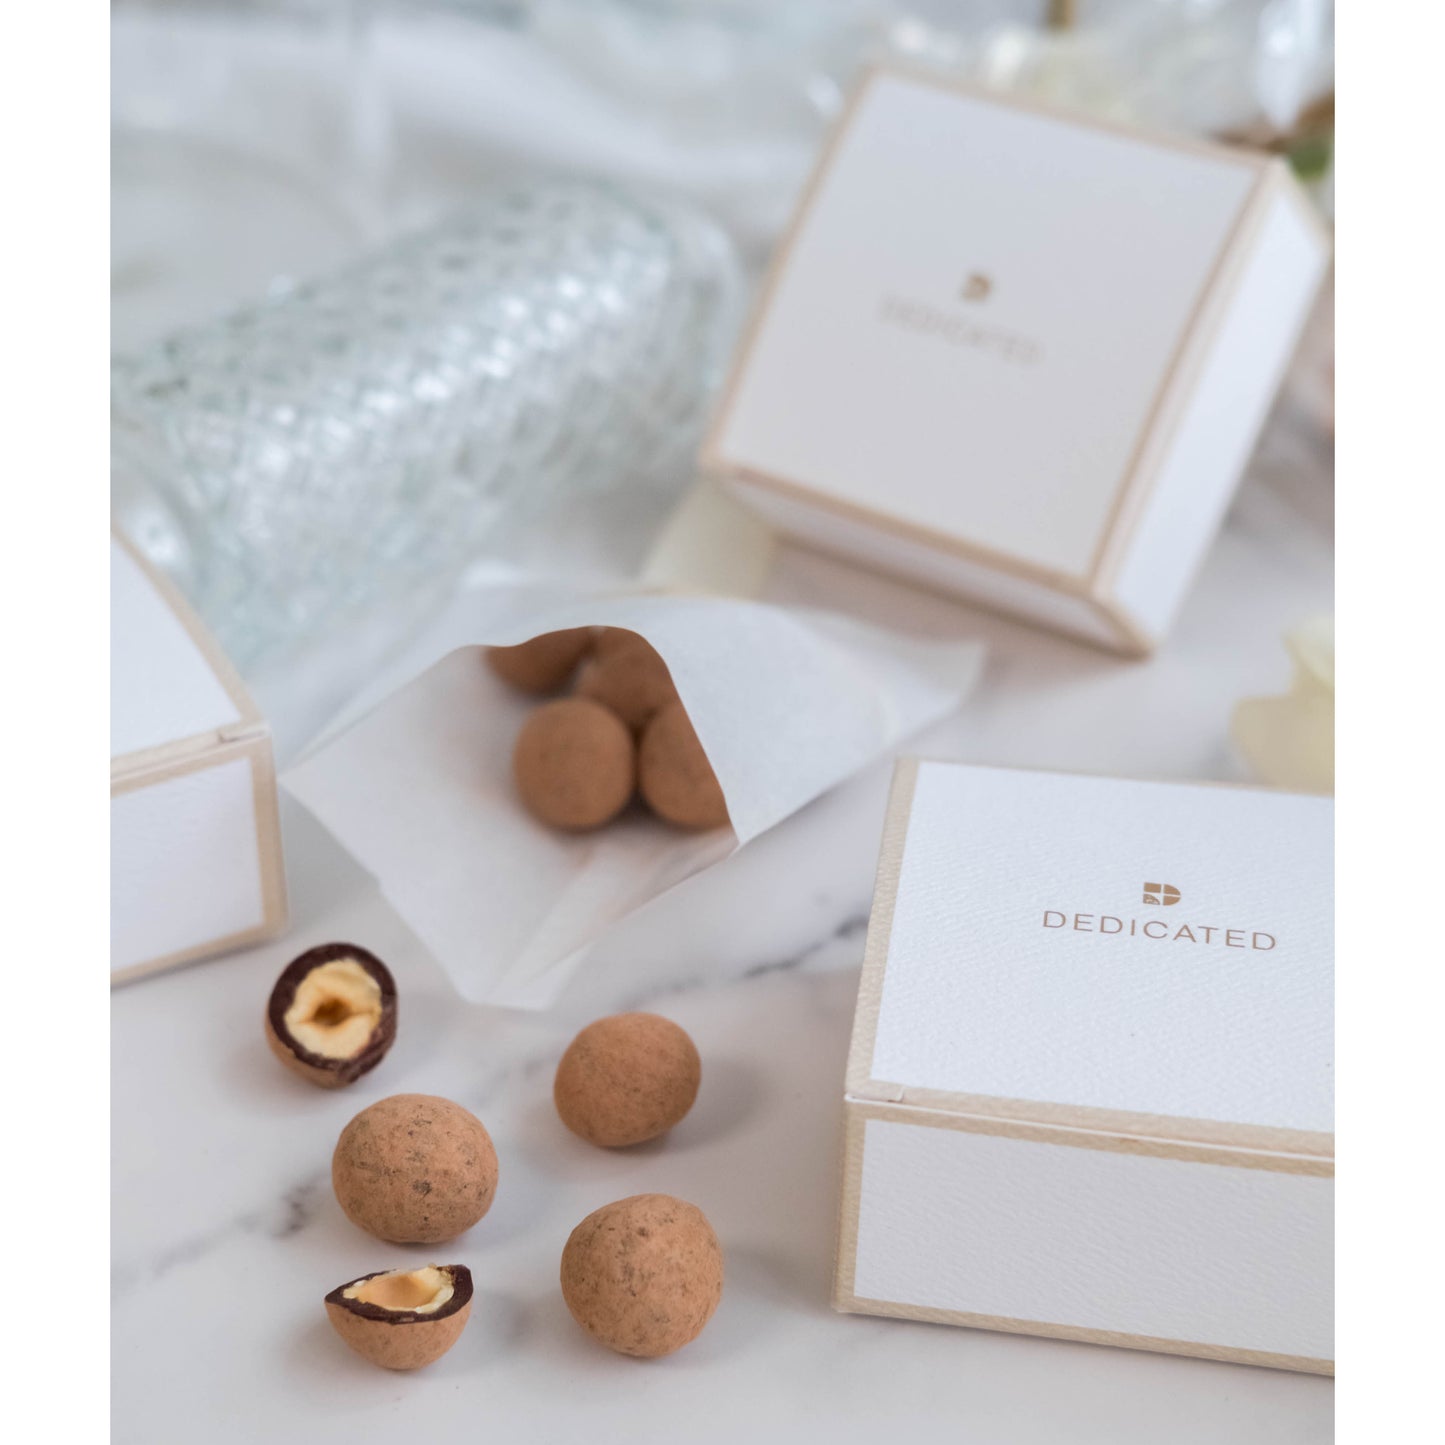 Chocolate-covered Camalized Hazelnuts for Corporate Gift / Farewell Gift / Wedding Gift